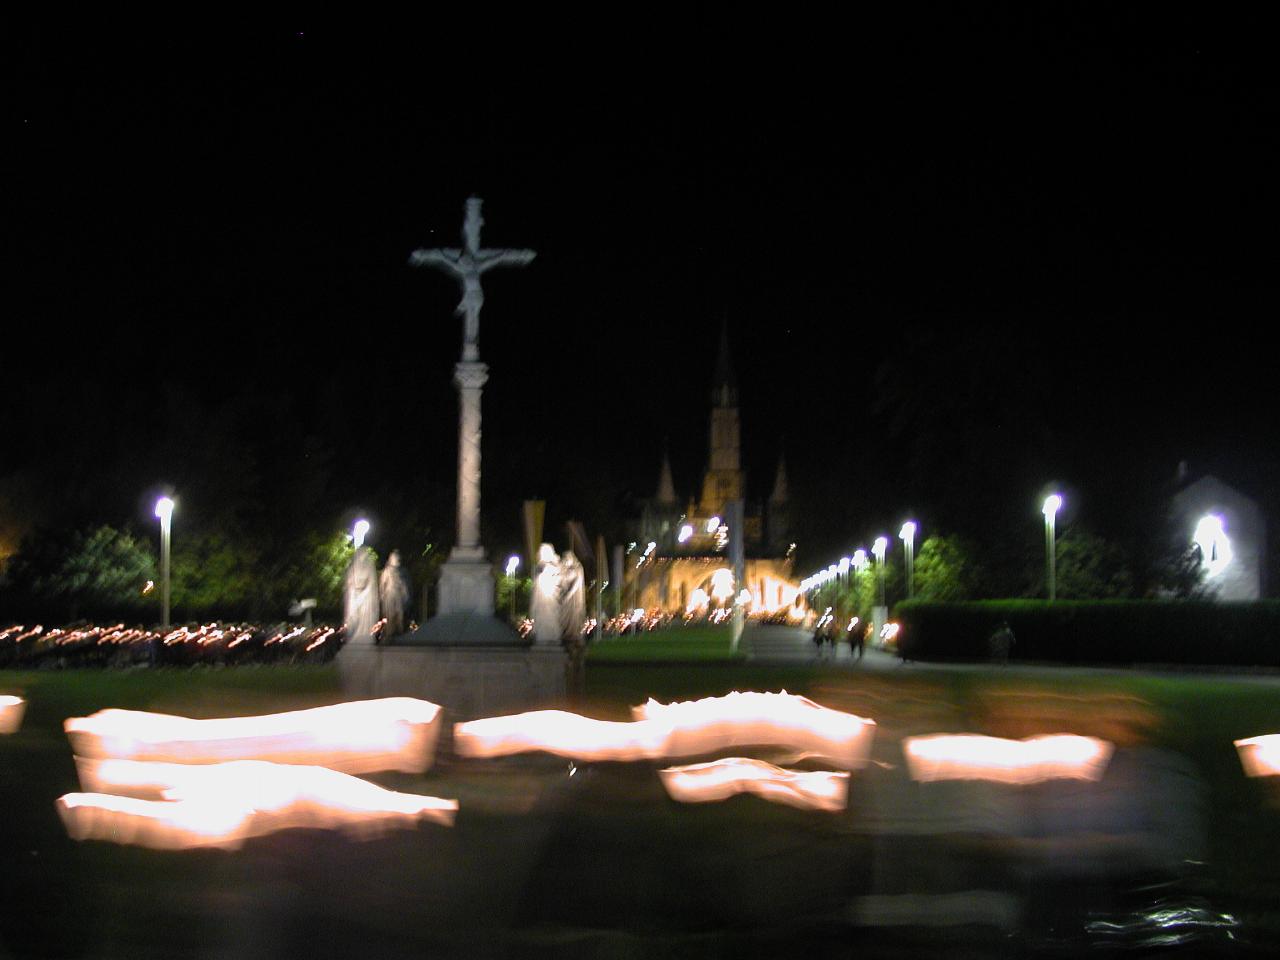 Looking from end of torchlight procession towards cathedral